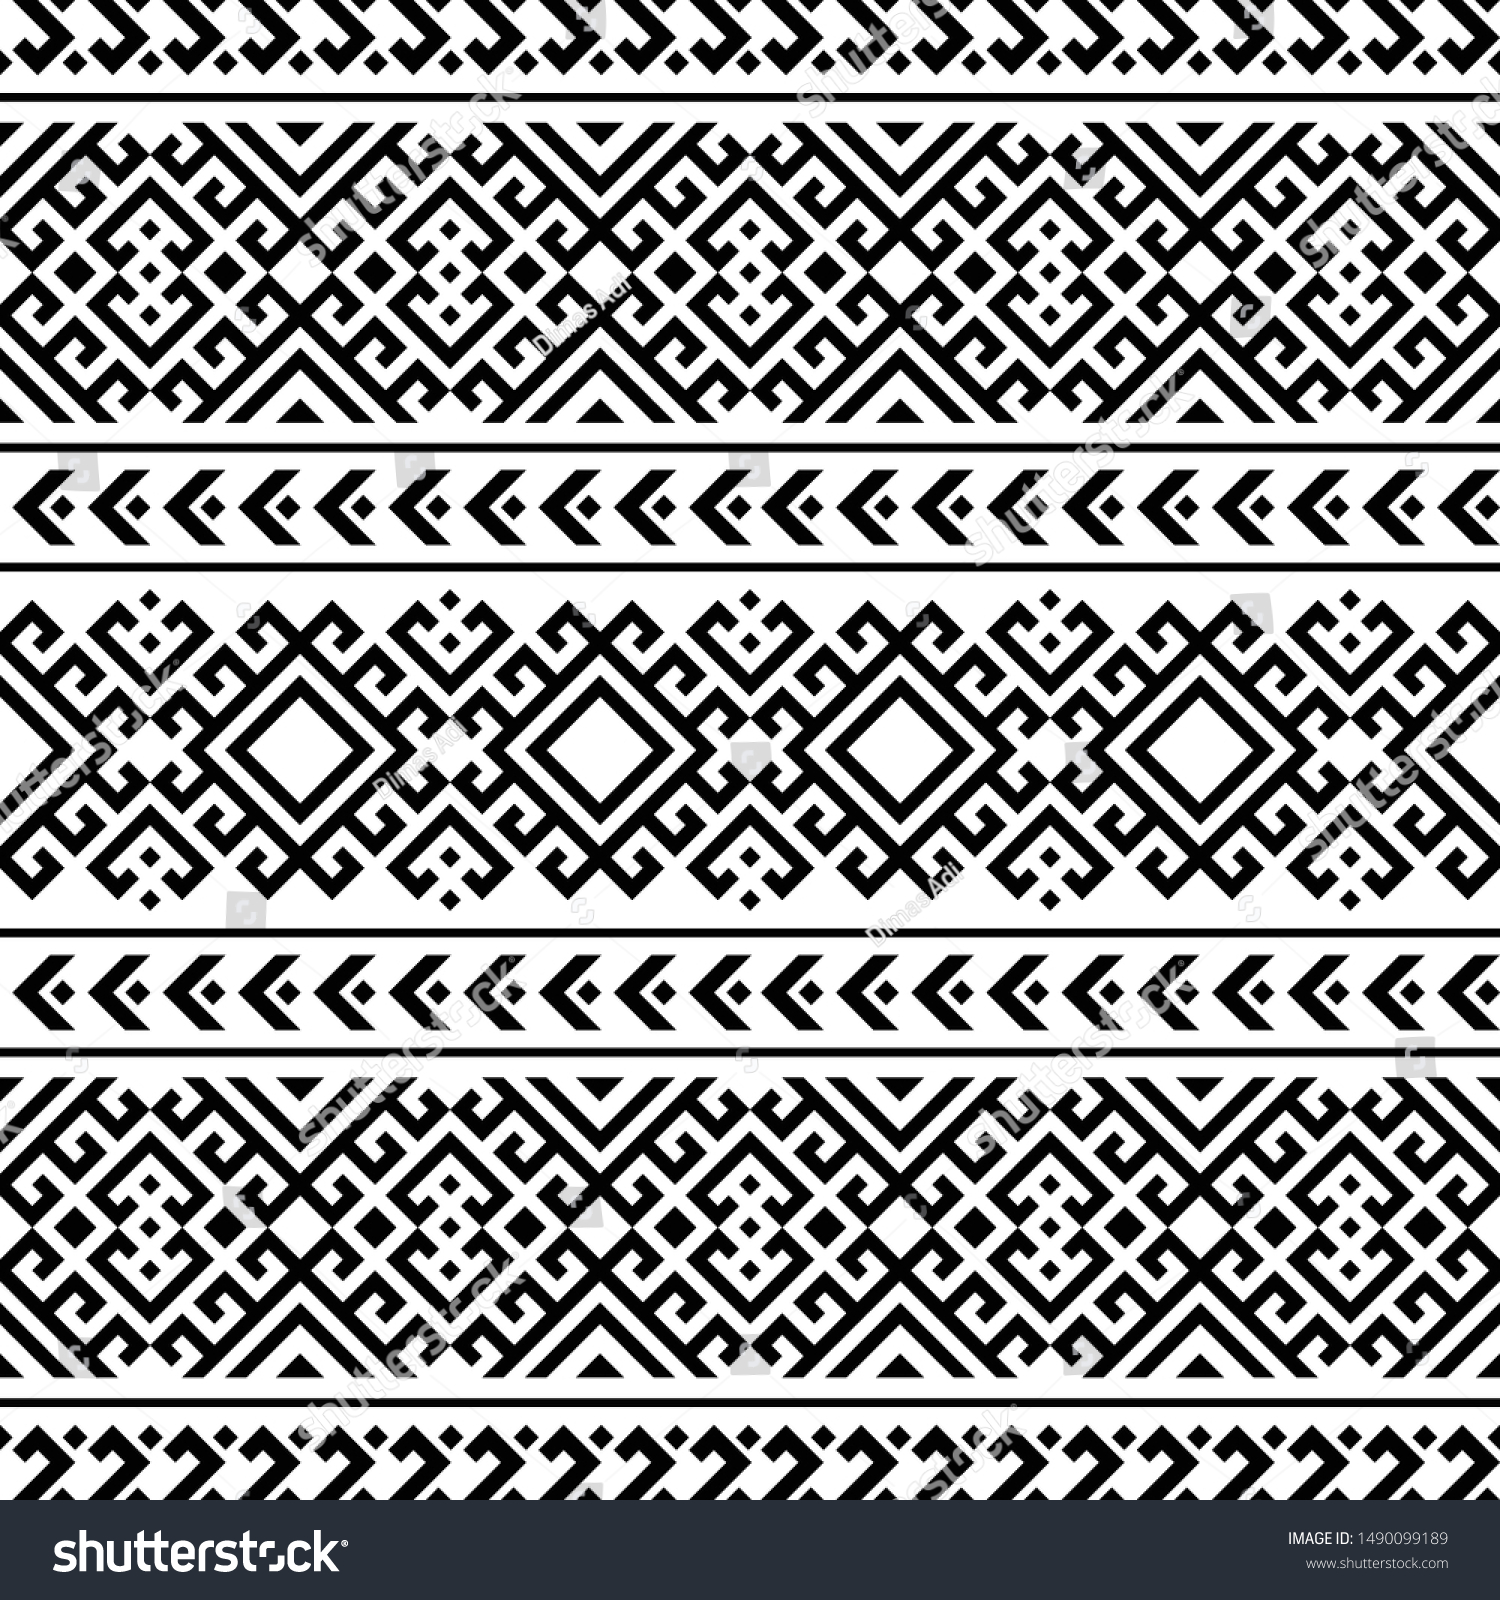 Abstract Ethnic Geometric Pattern Design Black Stock Vector (Royalty ...